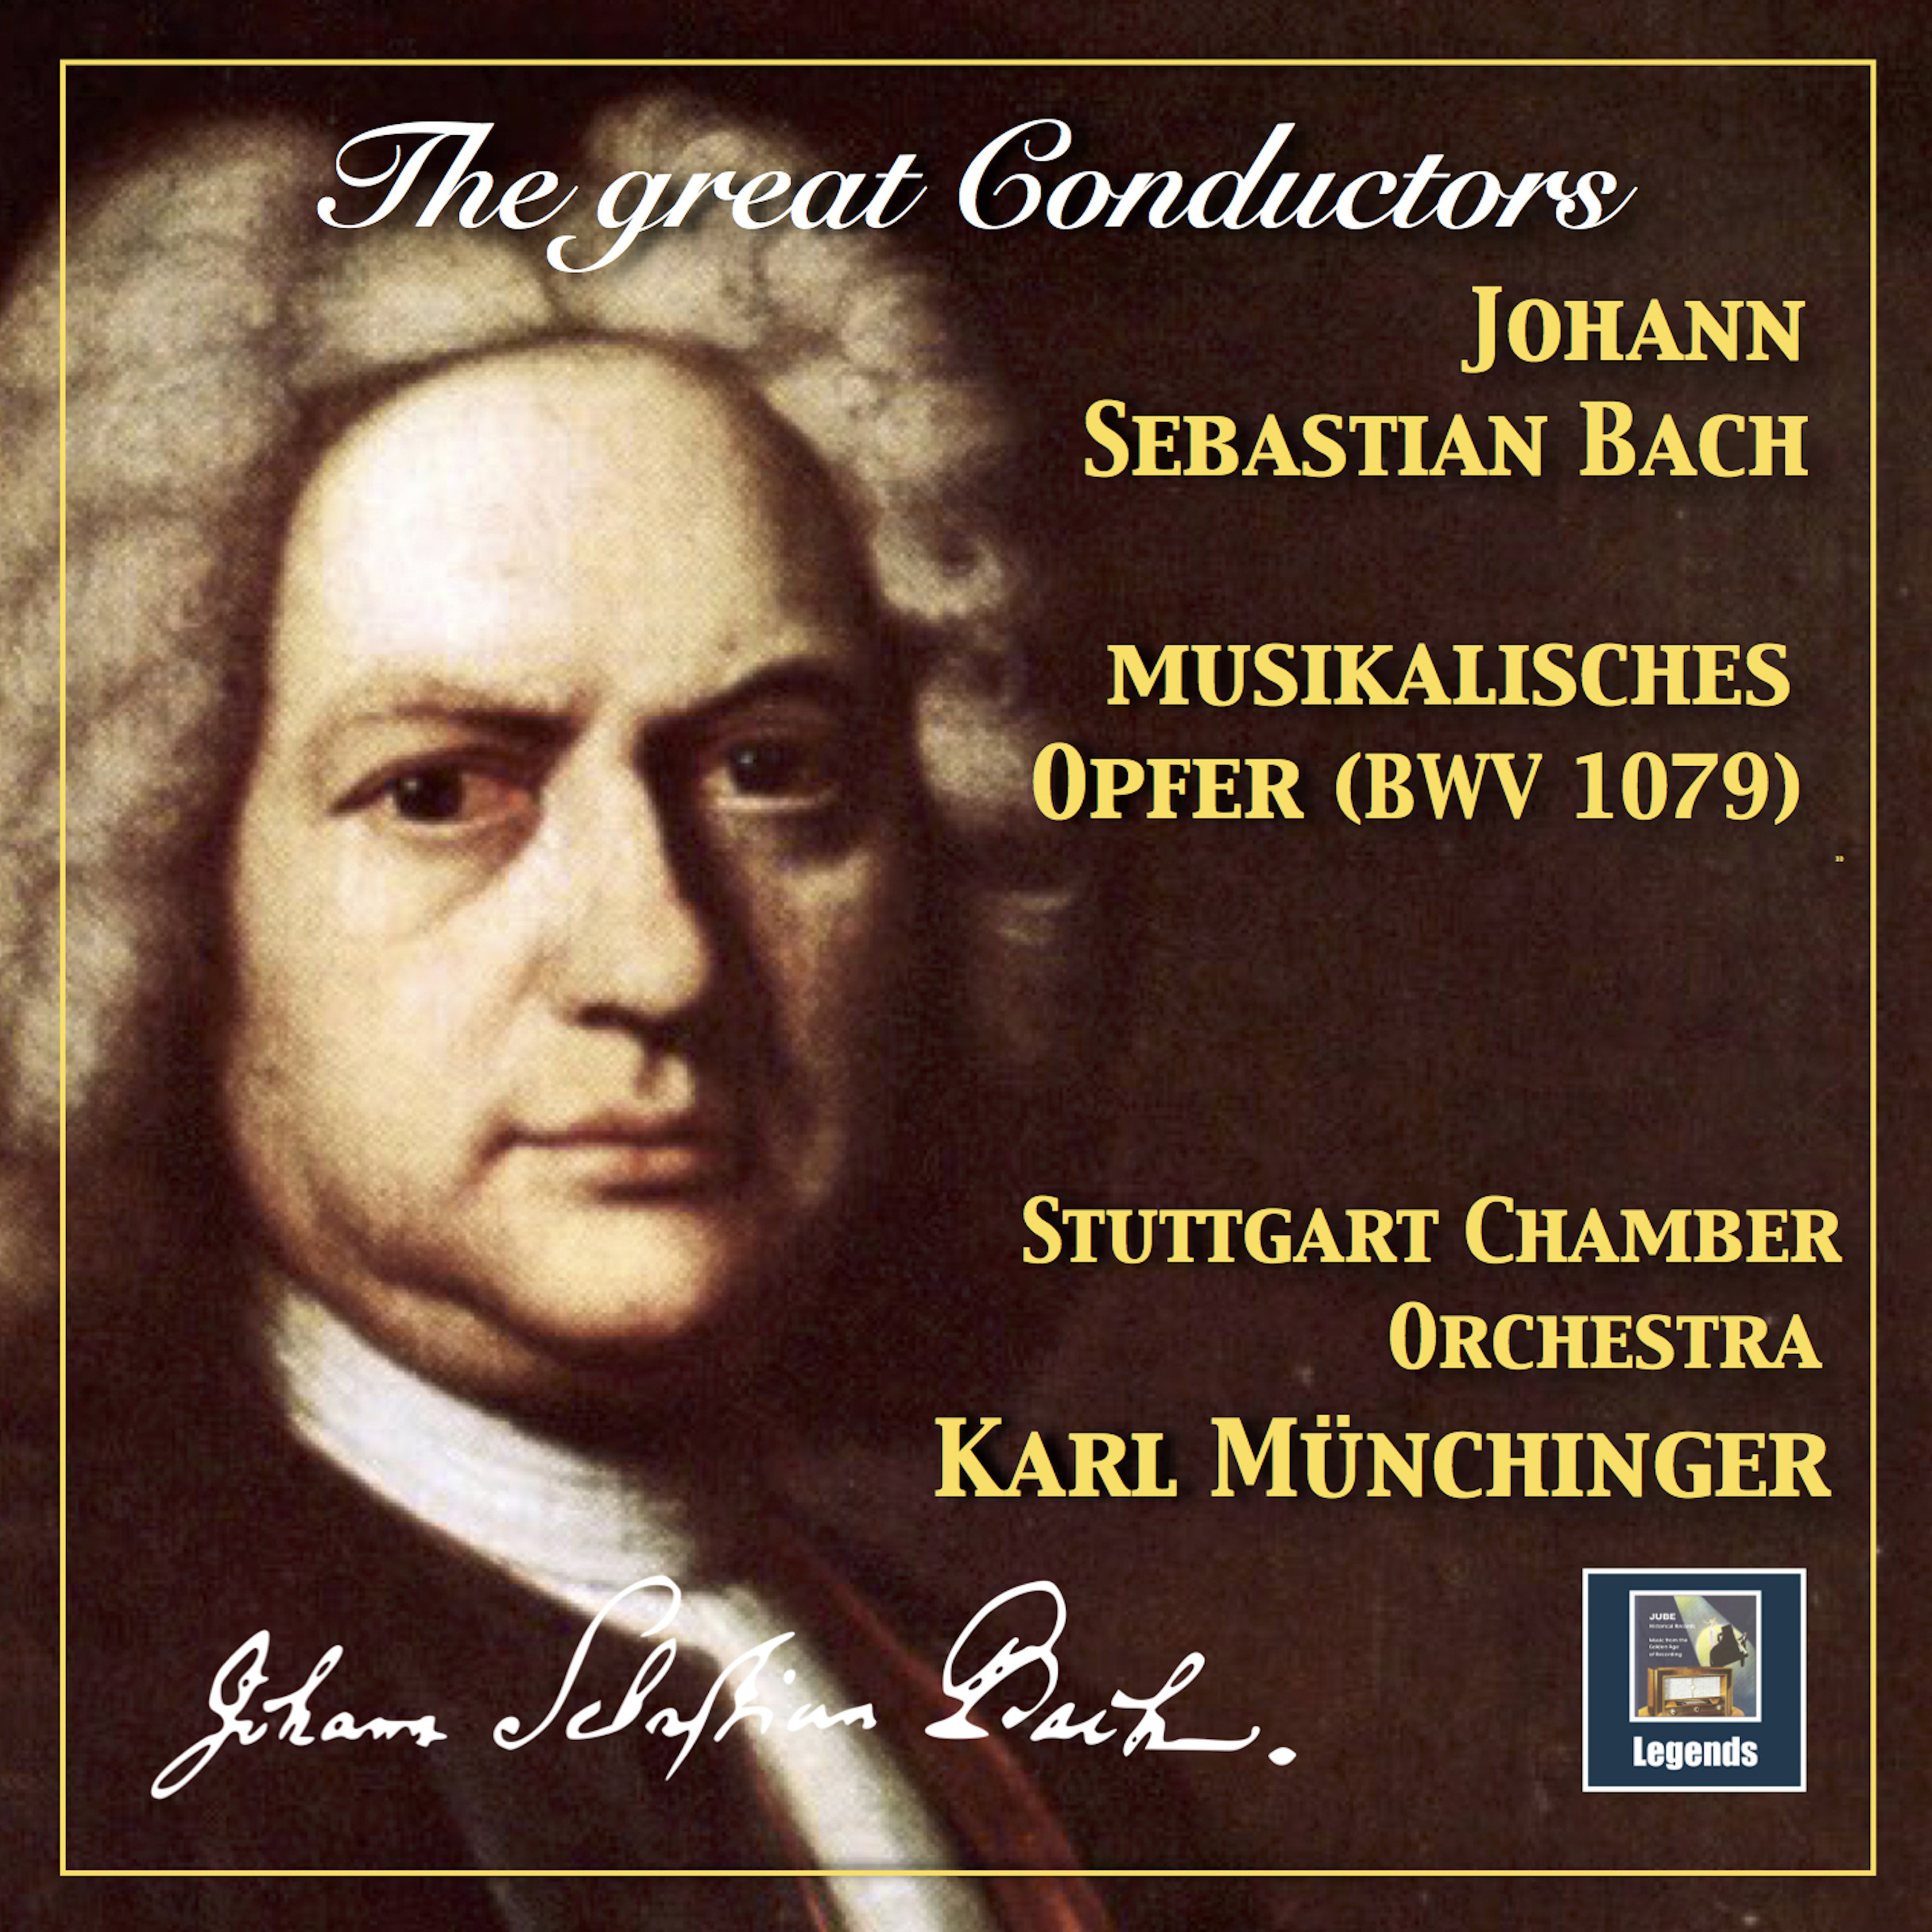 Musikalisches Opfer, BWV 1079 (Arr. K. Münchinger for Chamber Orchestra): Canon à 2 [Canon cancricans]